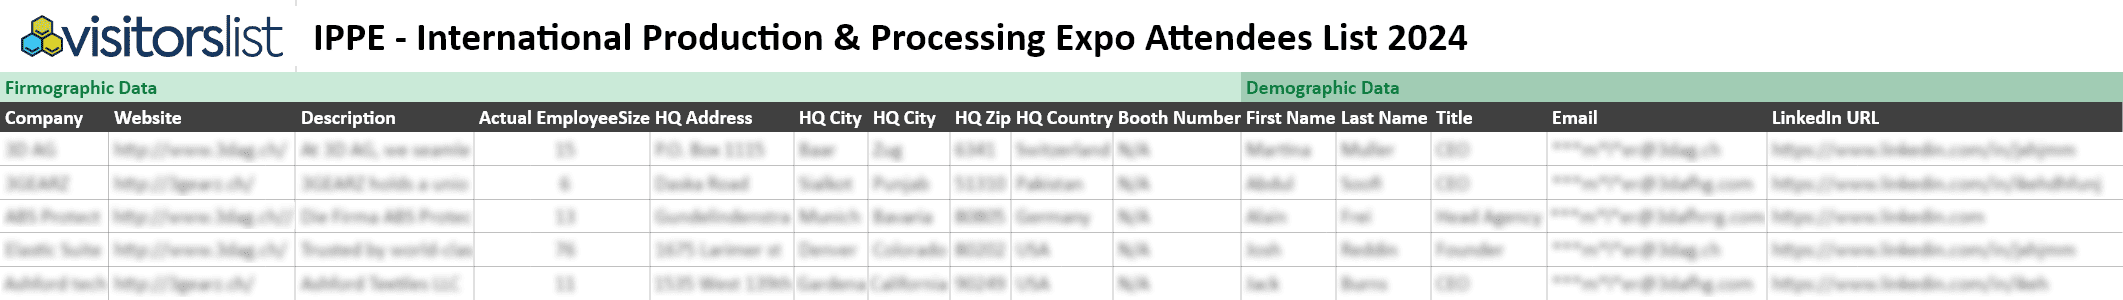 IPPE - International Production & Processing Expo Attendees List 2024